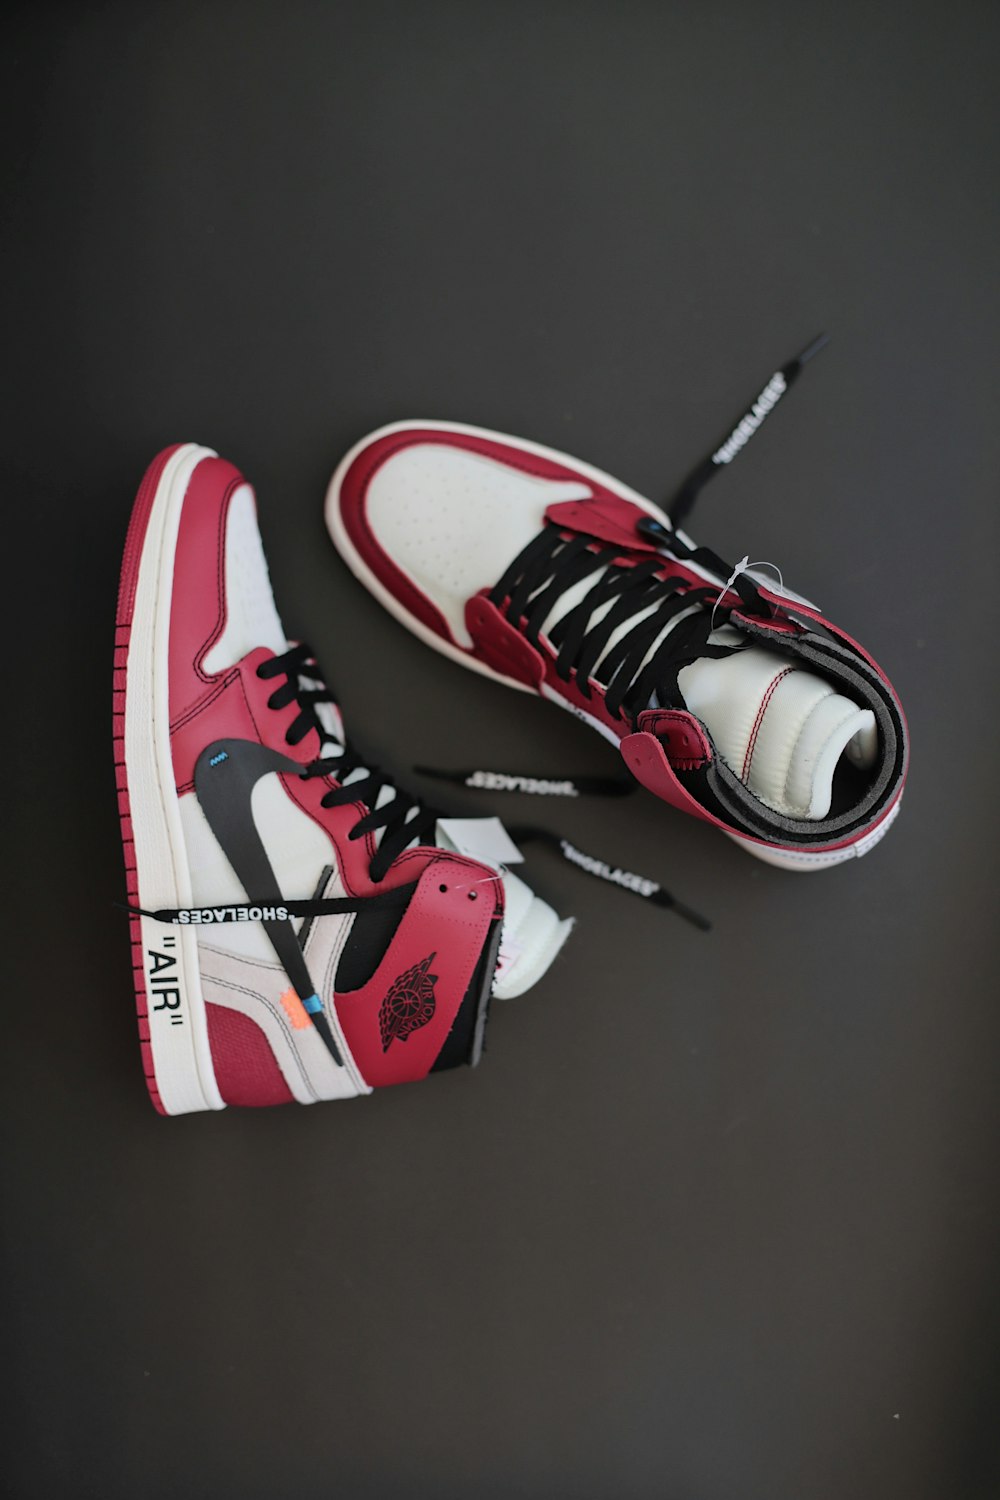 pair of red-white-and-black Nike Air Jordan athletic shoes photo – Free  Clothing Image on Unsplash